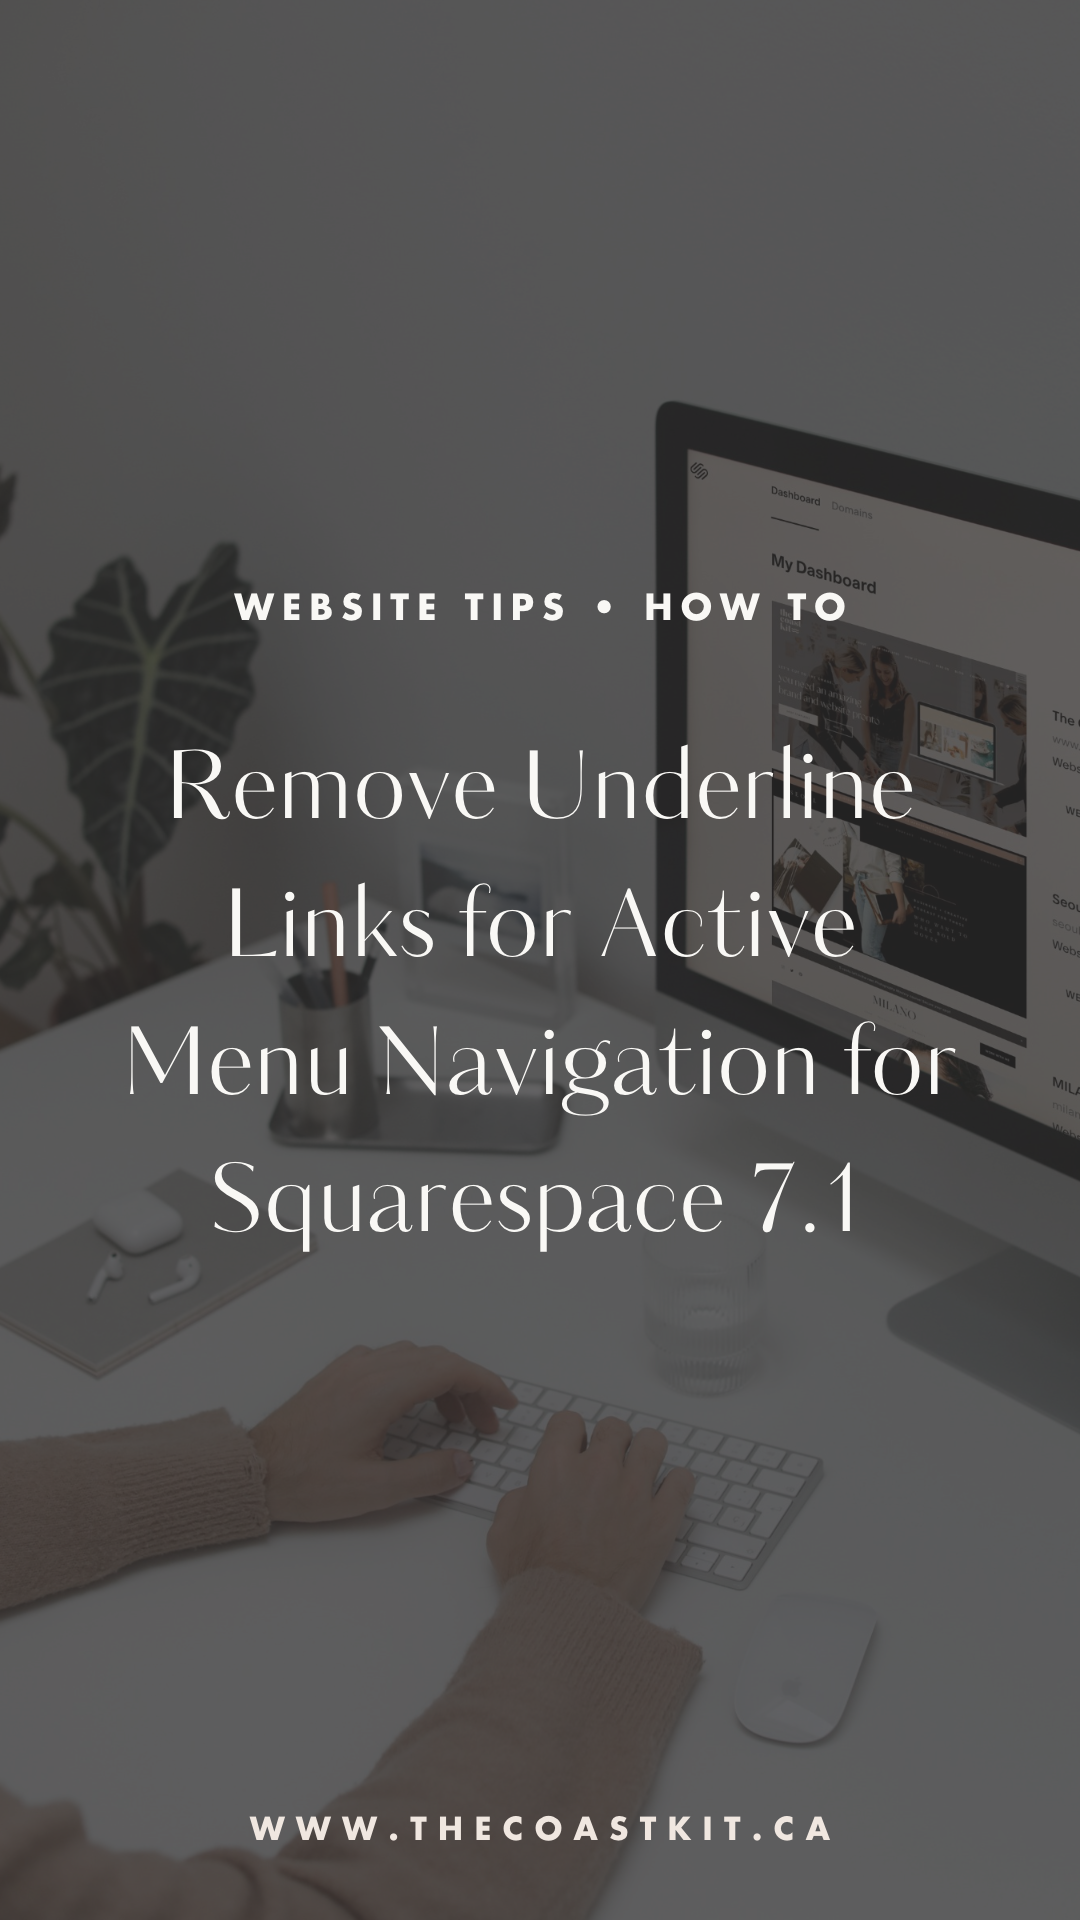 how-to-remove-underline-links-menu-squarespace-7-1-2.png